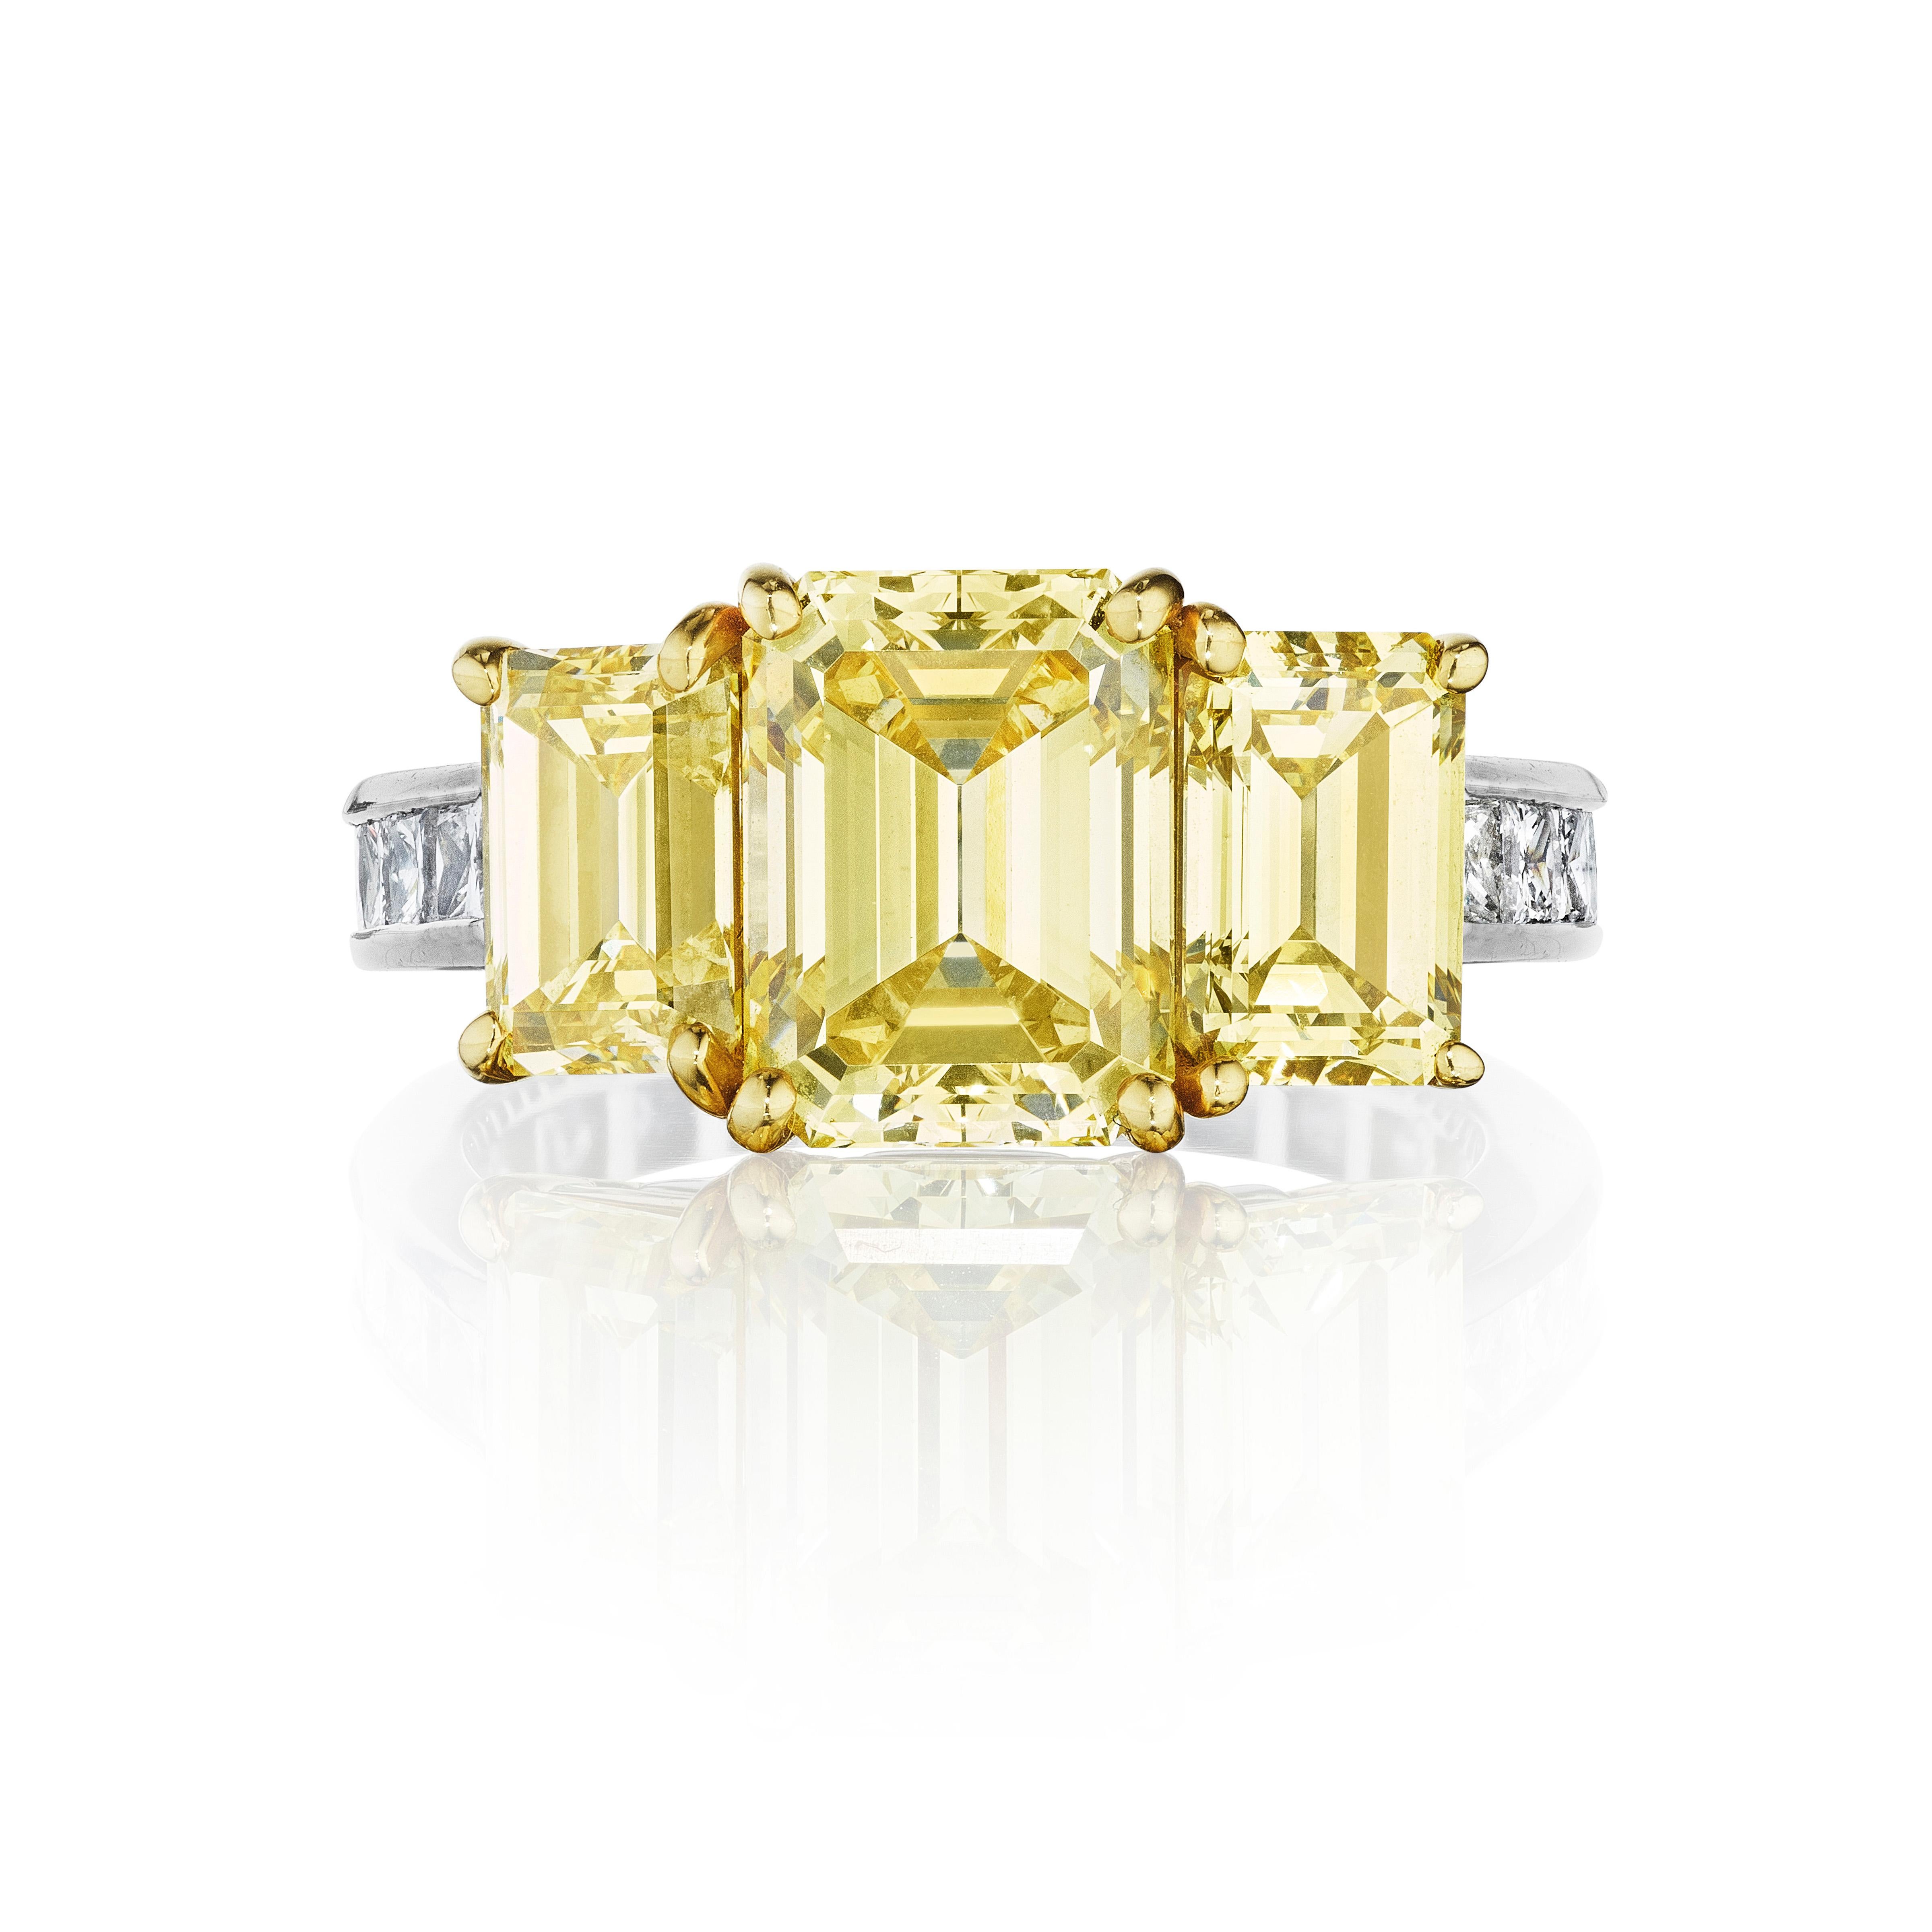 Emerald Cut GIA Certified Natural Fancy Intense Yellow Diamond Ring by Siegelson, NY For Sale